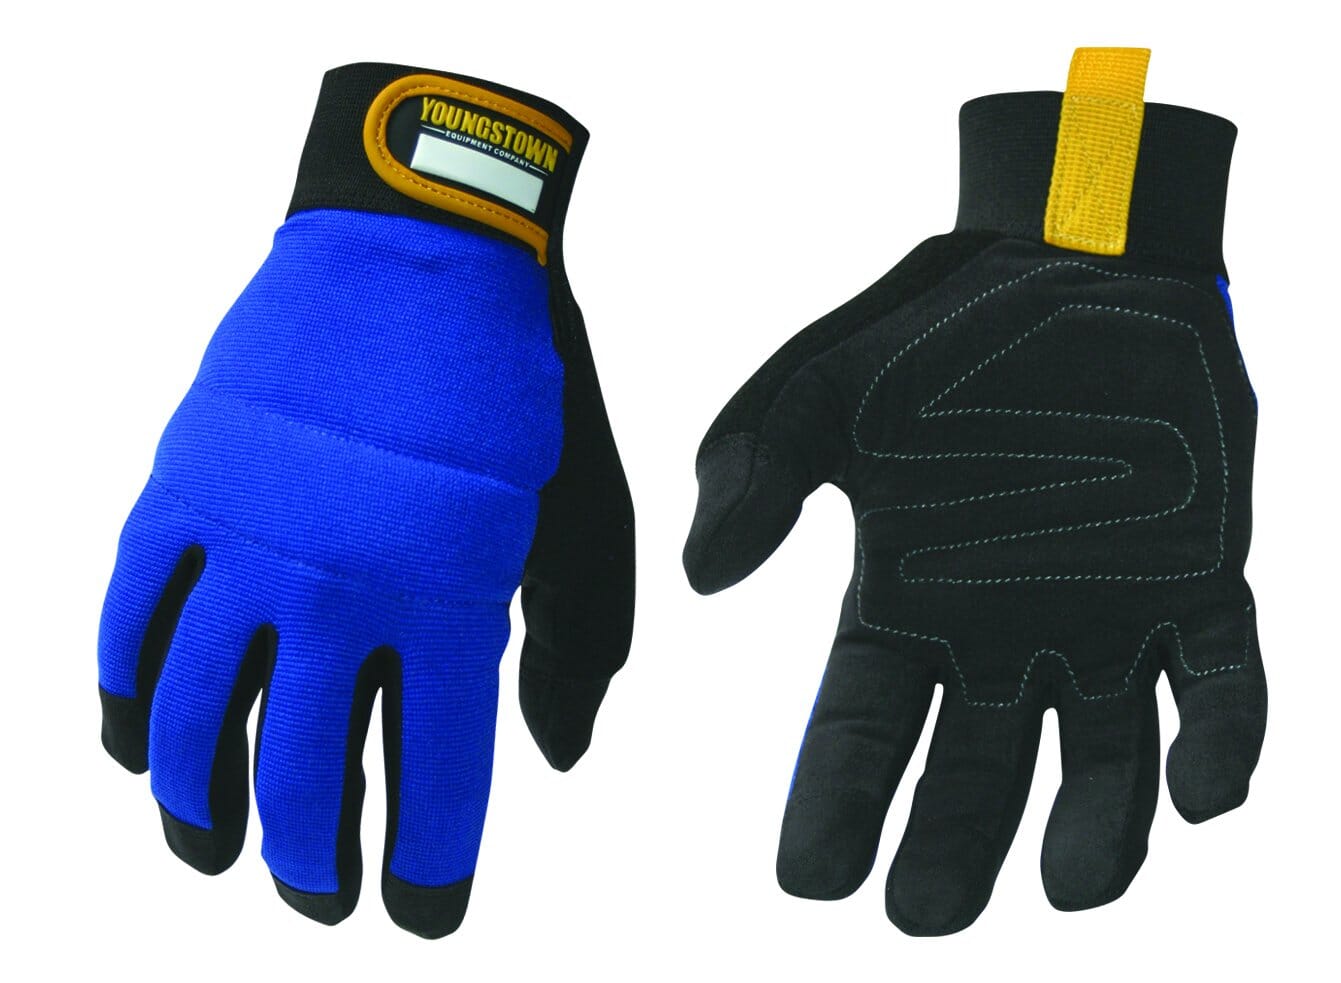 Youngstown Mechanics Plus Gloves 06-3020-60 Large